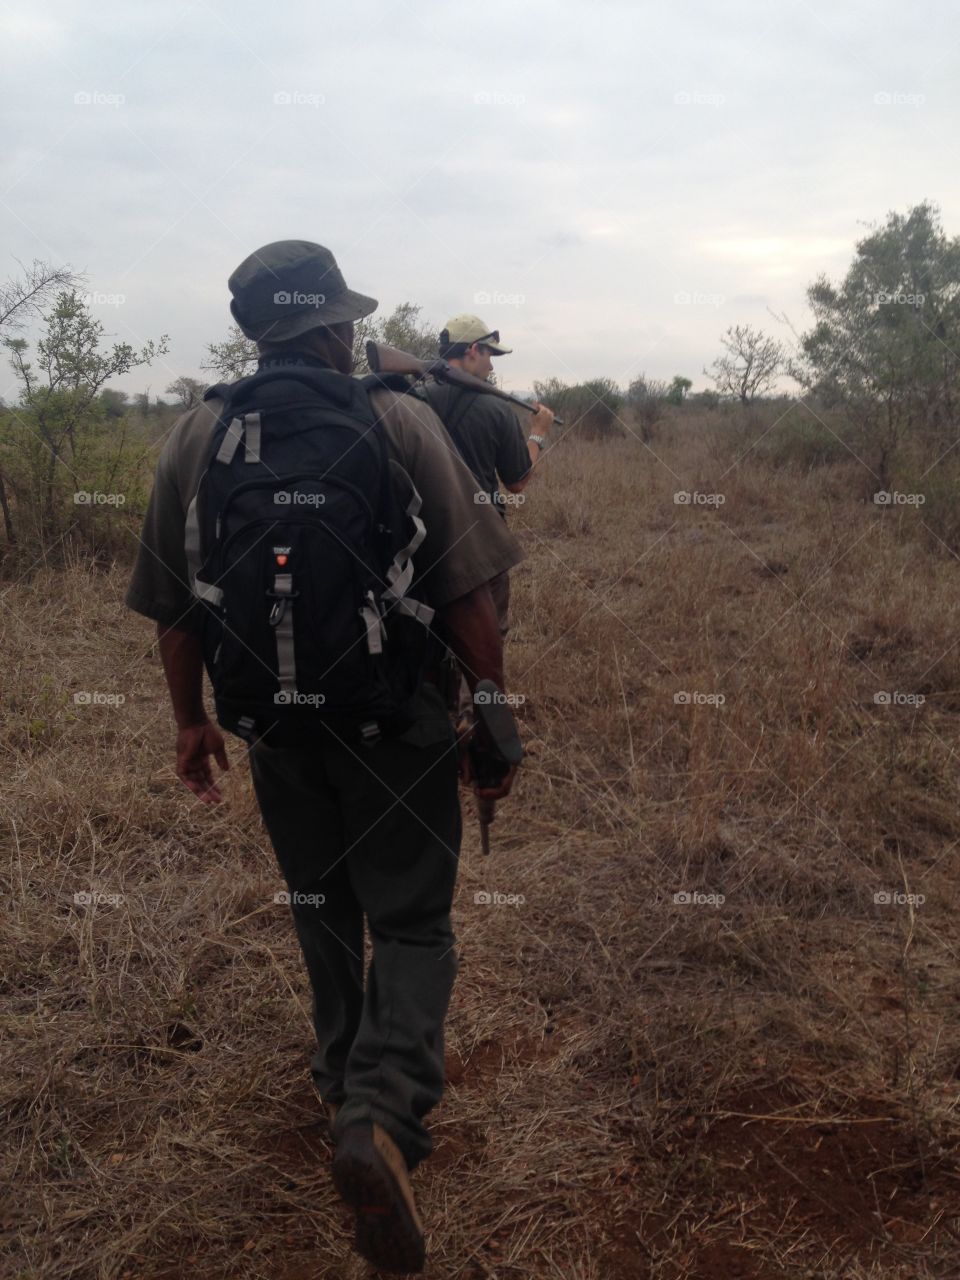 Rangers leading an early morning walking safari in Kruger National Park South Africa